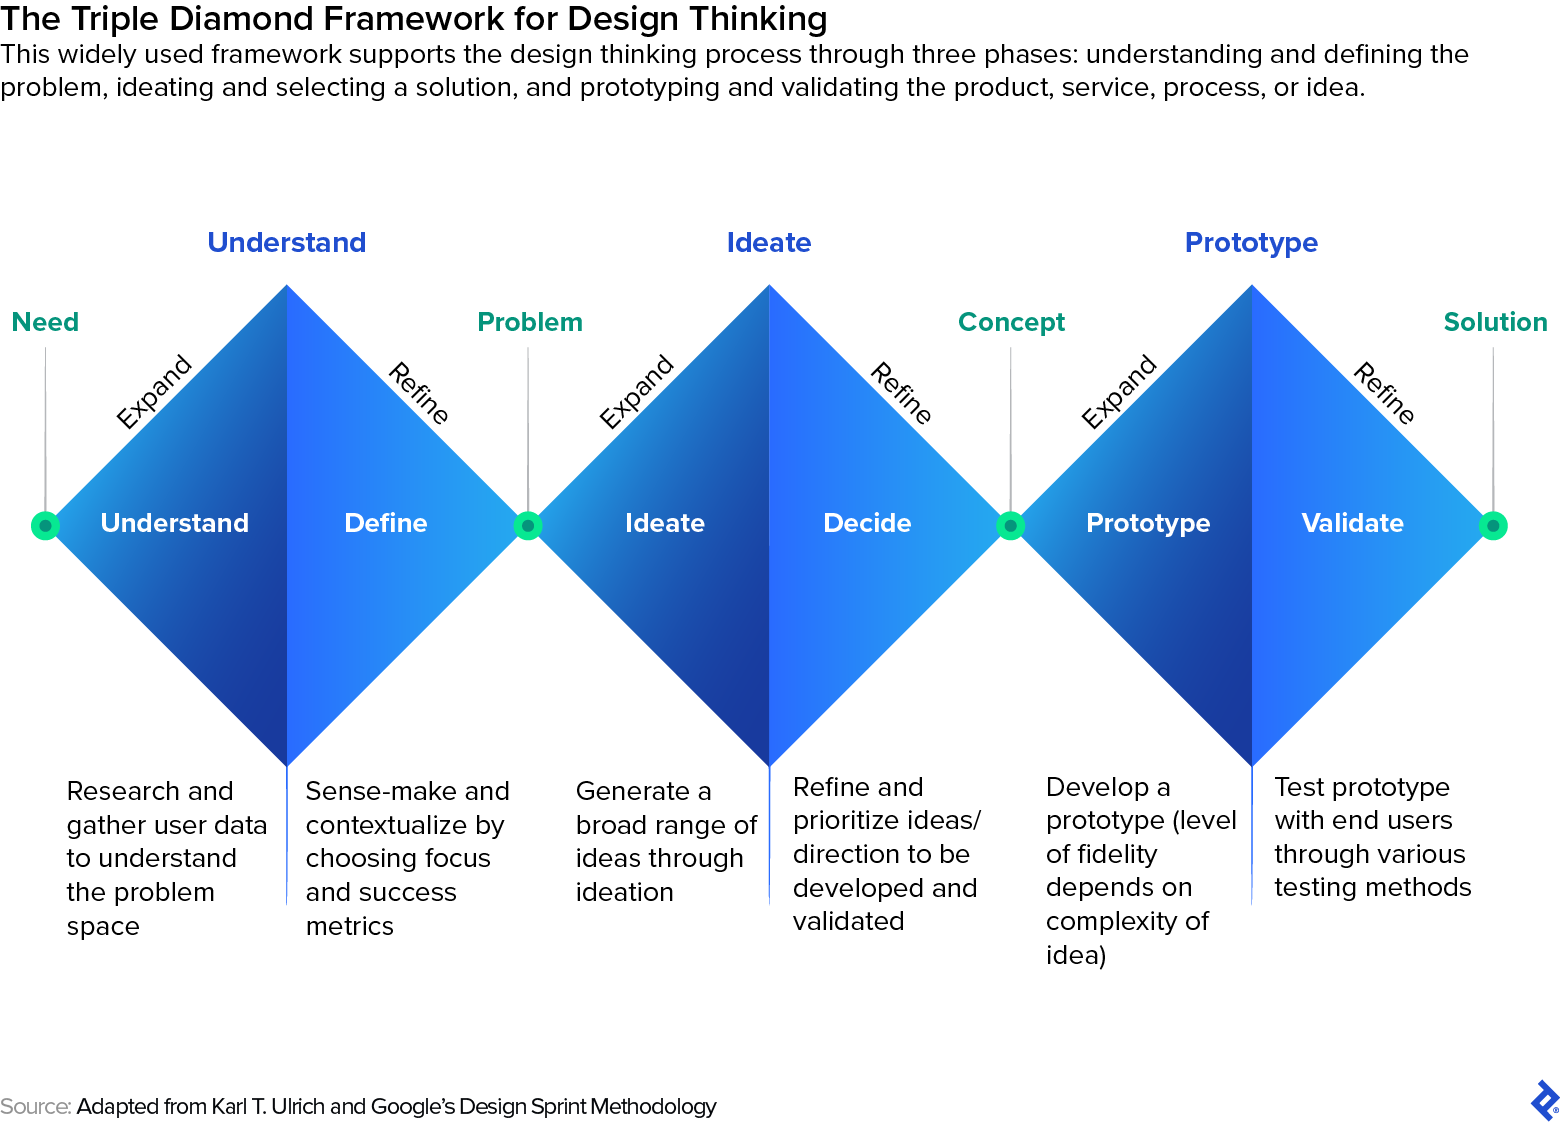 The triple diamond framework supports the design thinking process of understanding, ideating, and prototyping the product, service, process, or idea.